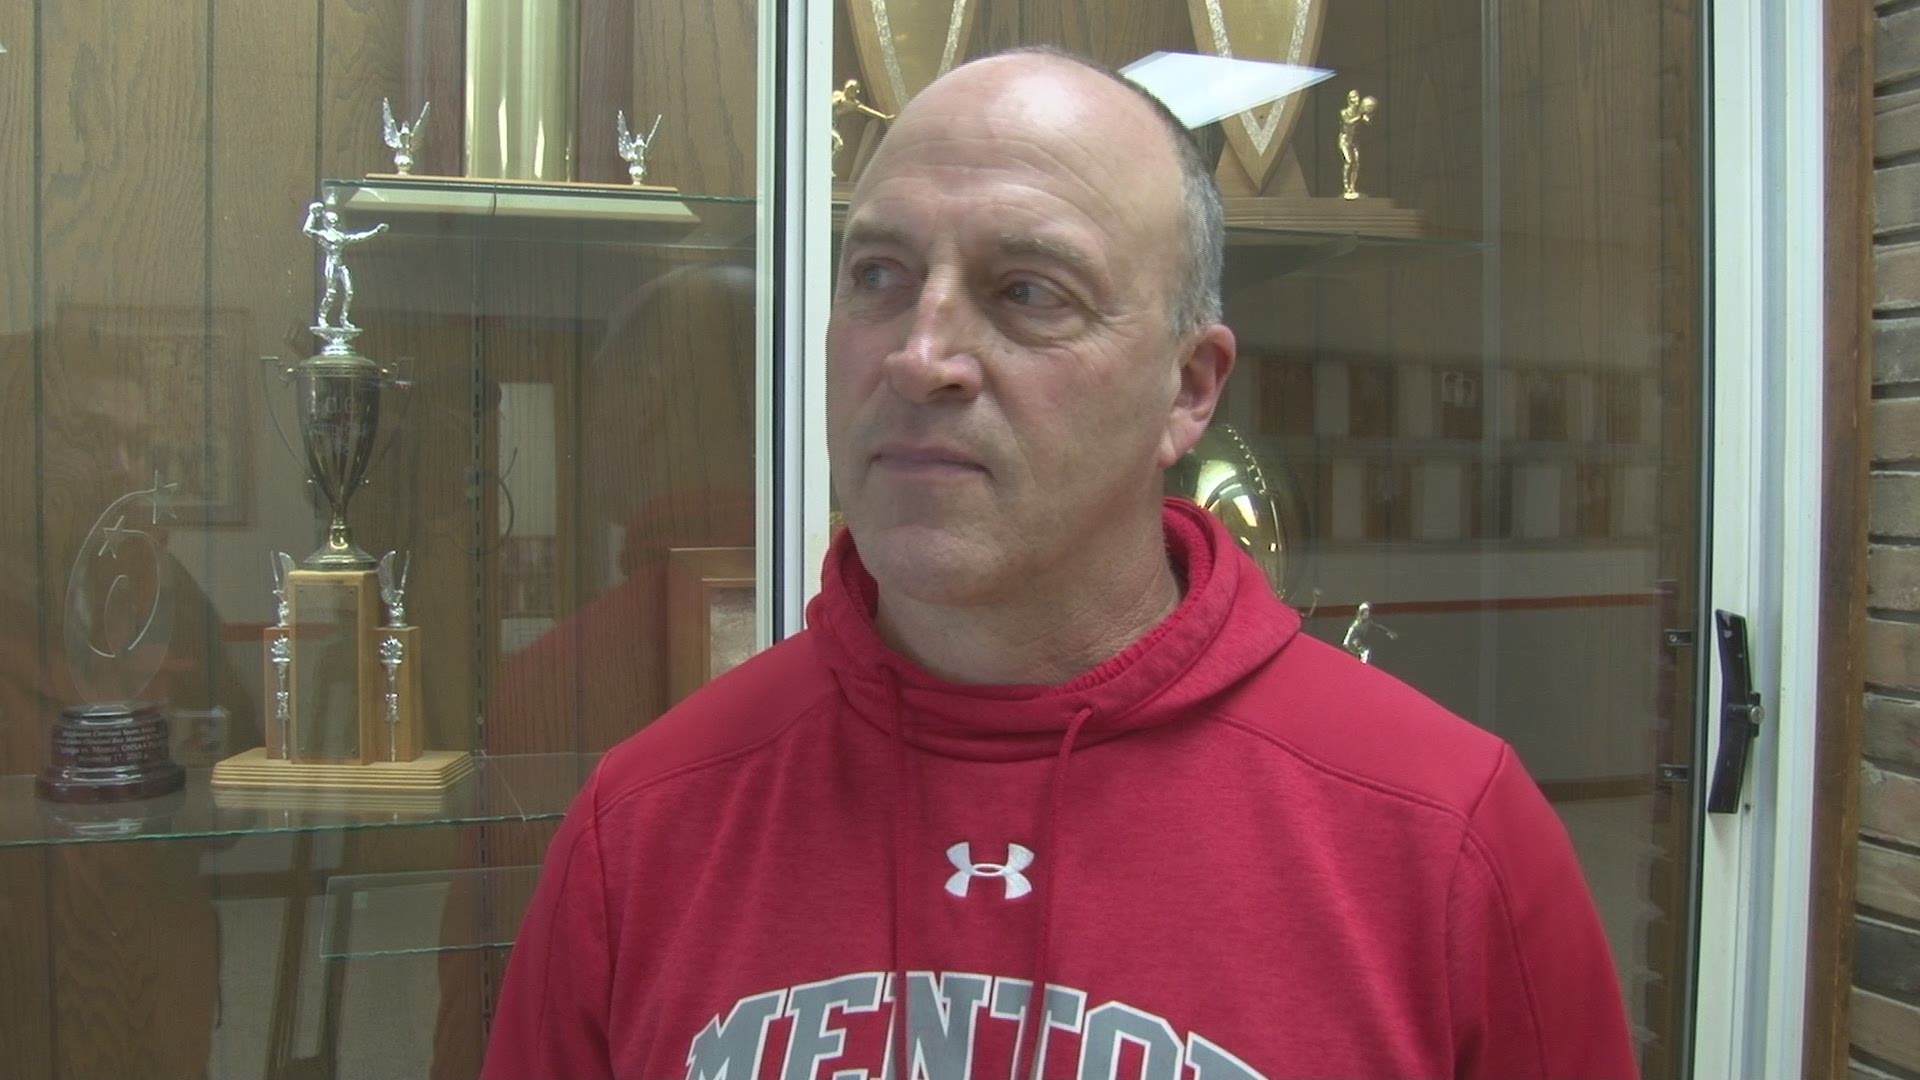 Mentor's Steve Trivisonno spoke with WKYC about his decision to leave the program after the 2019 season.